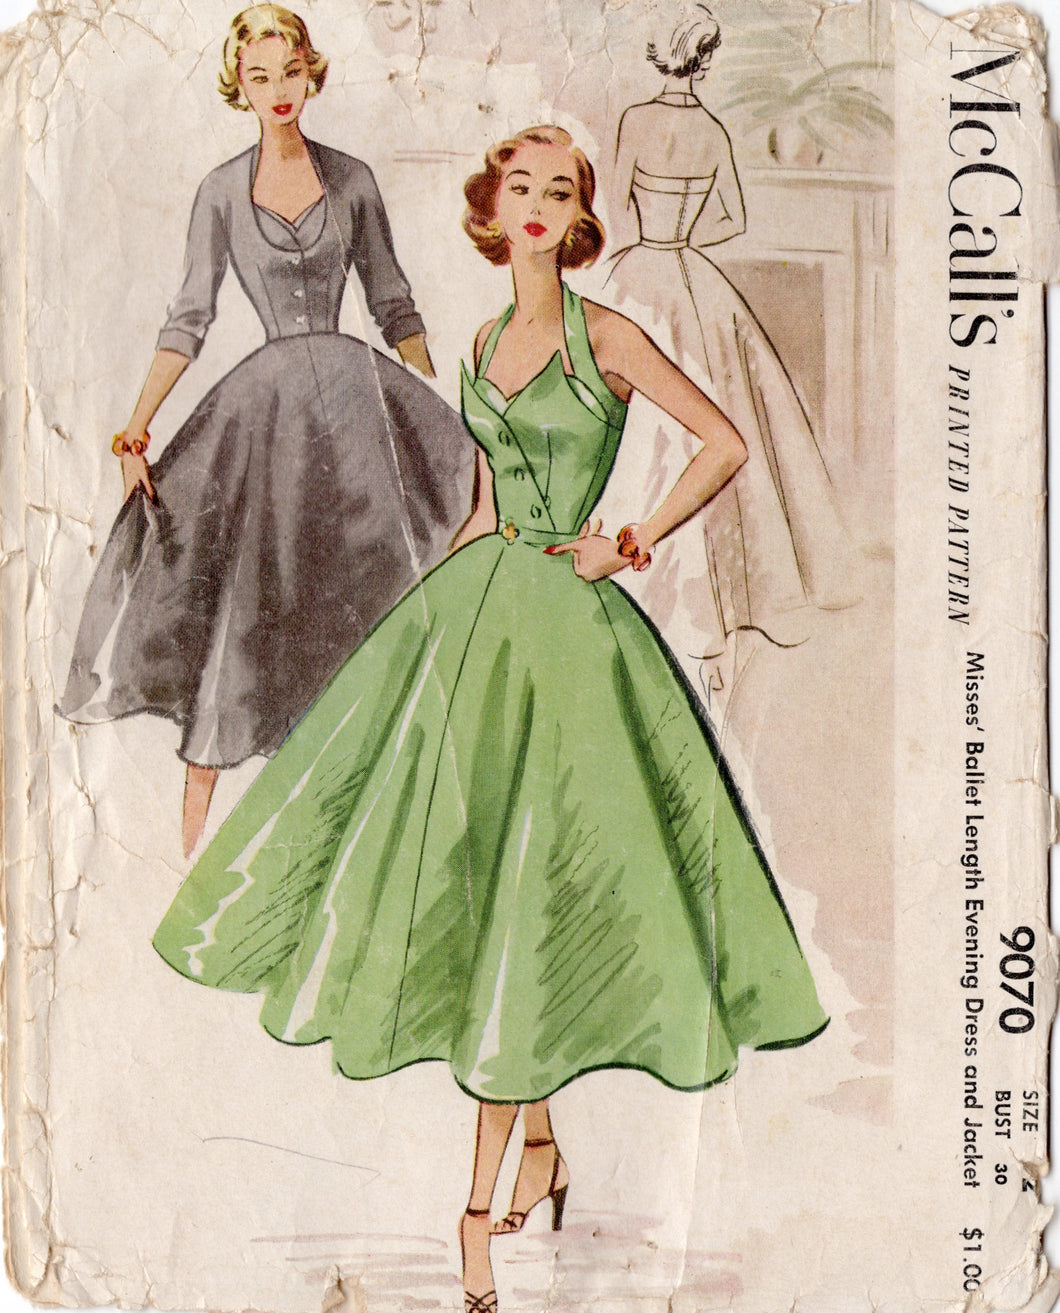 Mccall's 5580 Corset Style Summer Dress Pattern Sizes 4-12 -  Canada